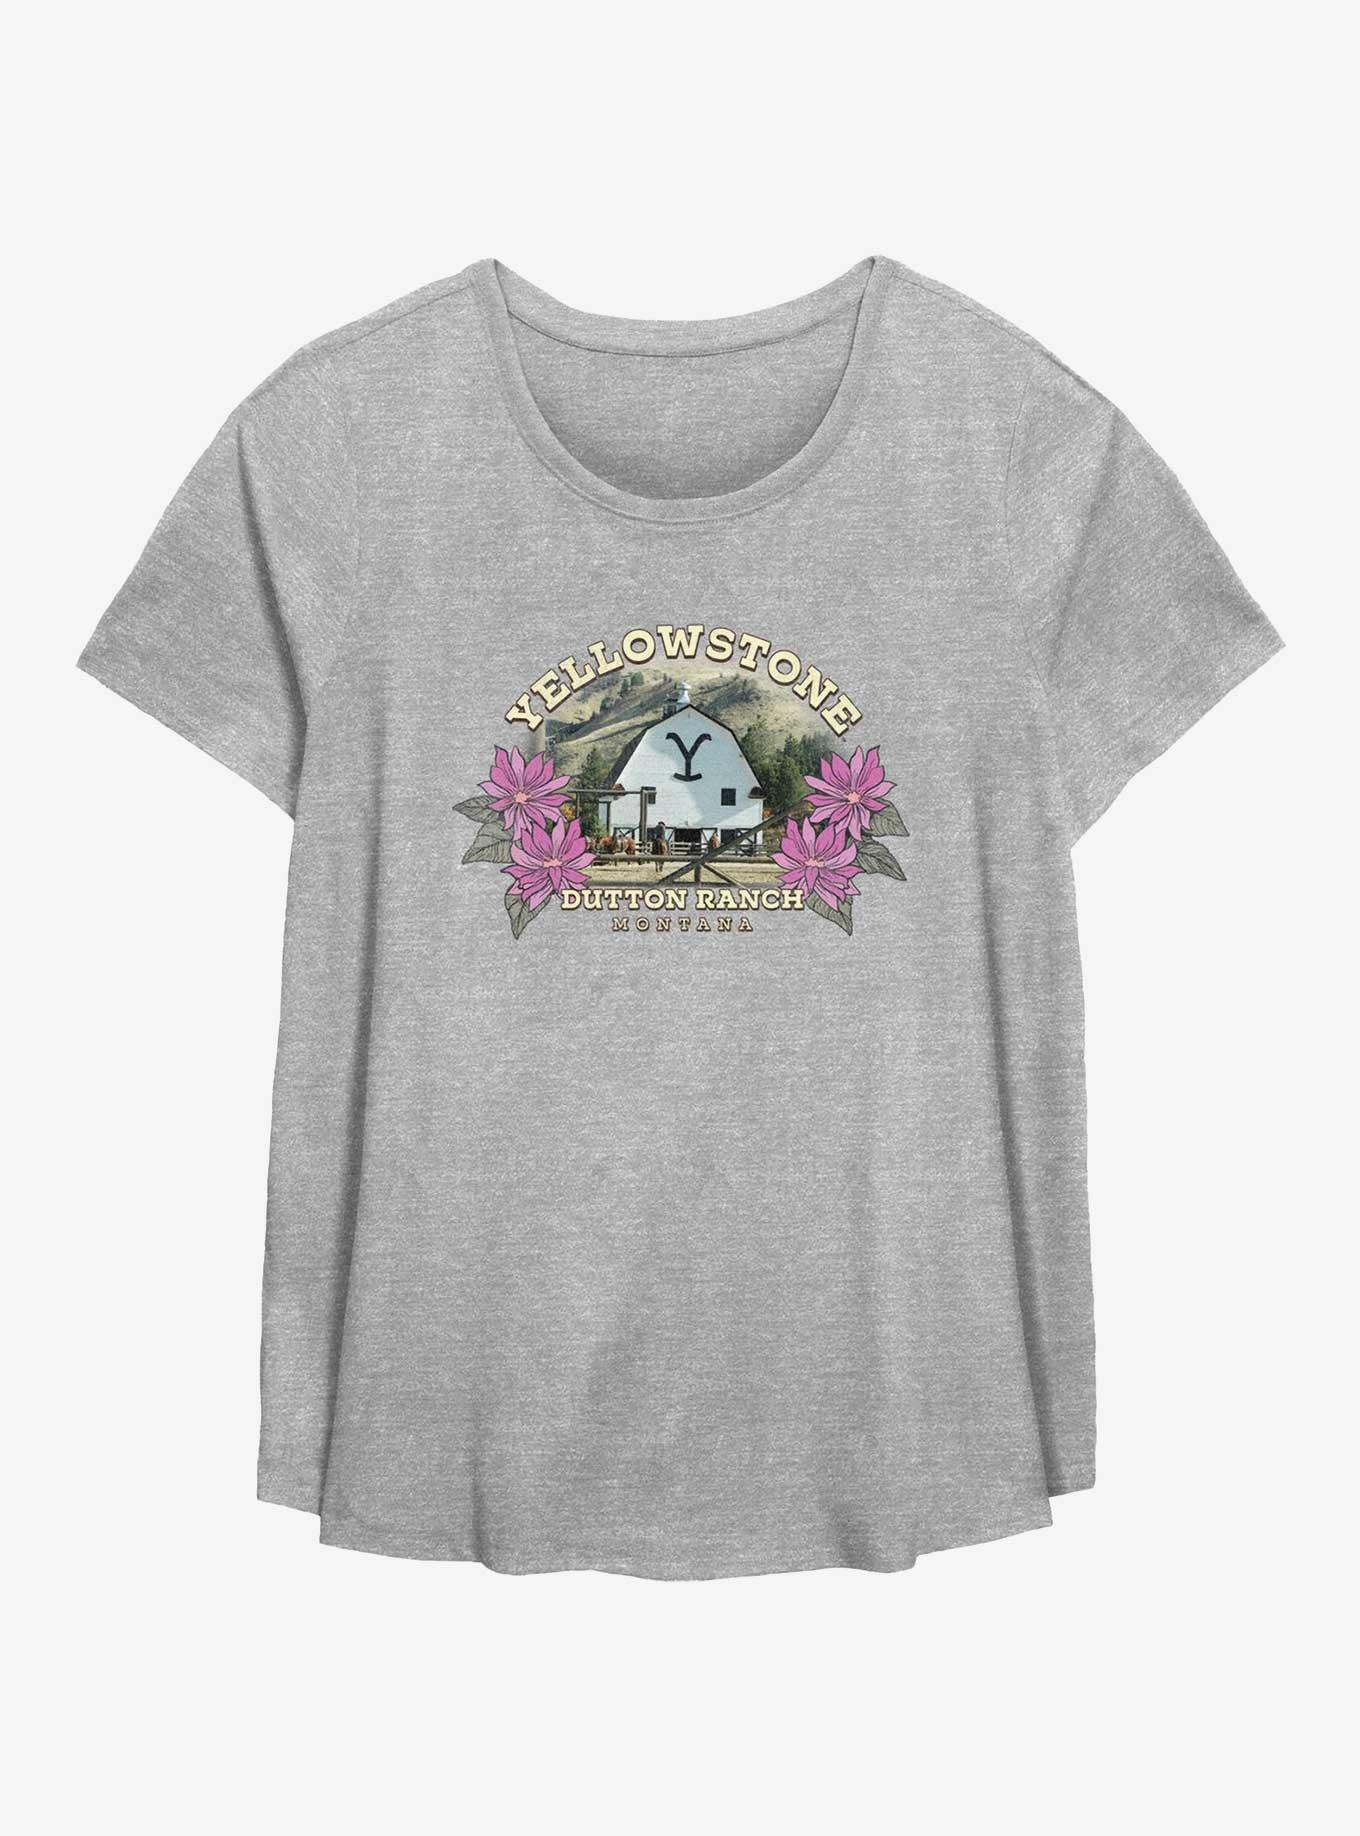 Yellowstone Ranch Photo Girls T-Shirt Plus Size, HEATHER GR, hi-res